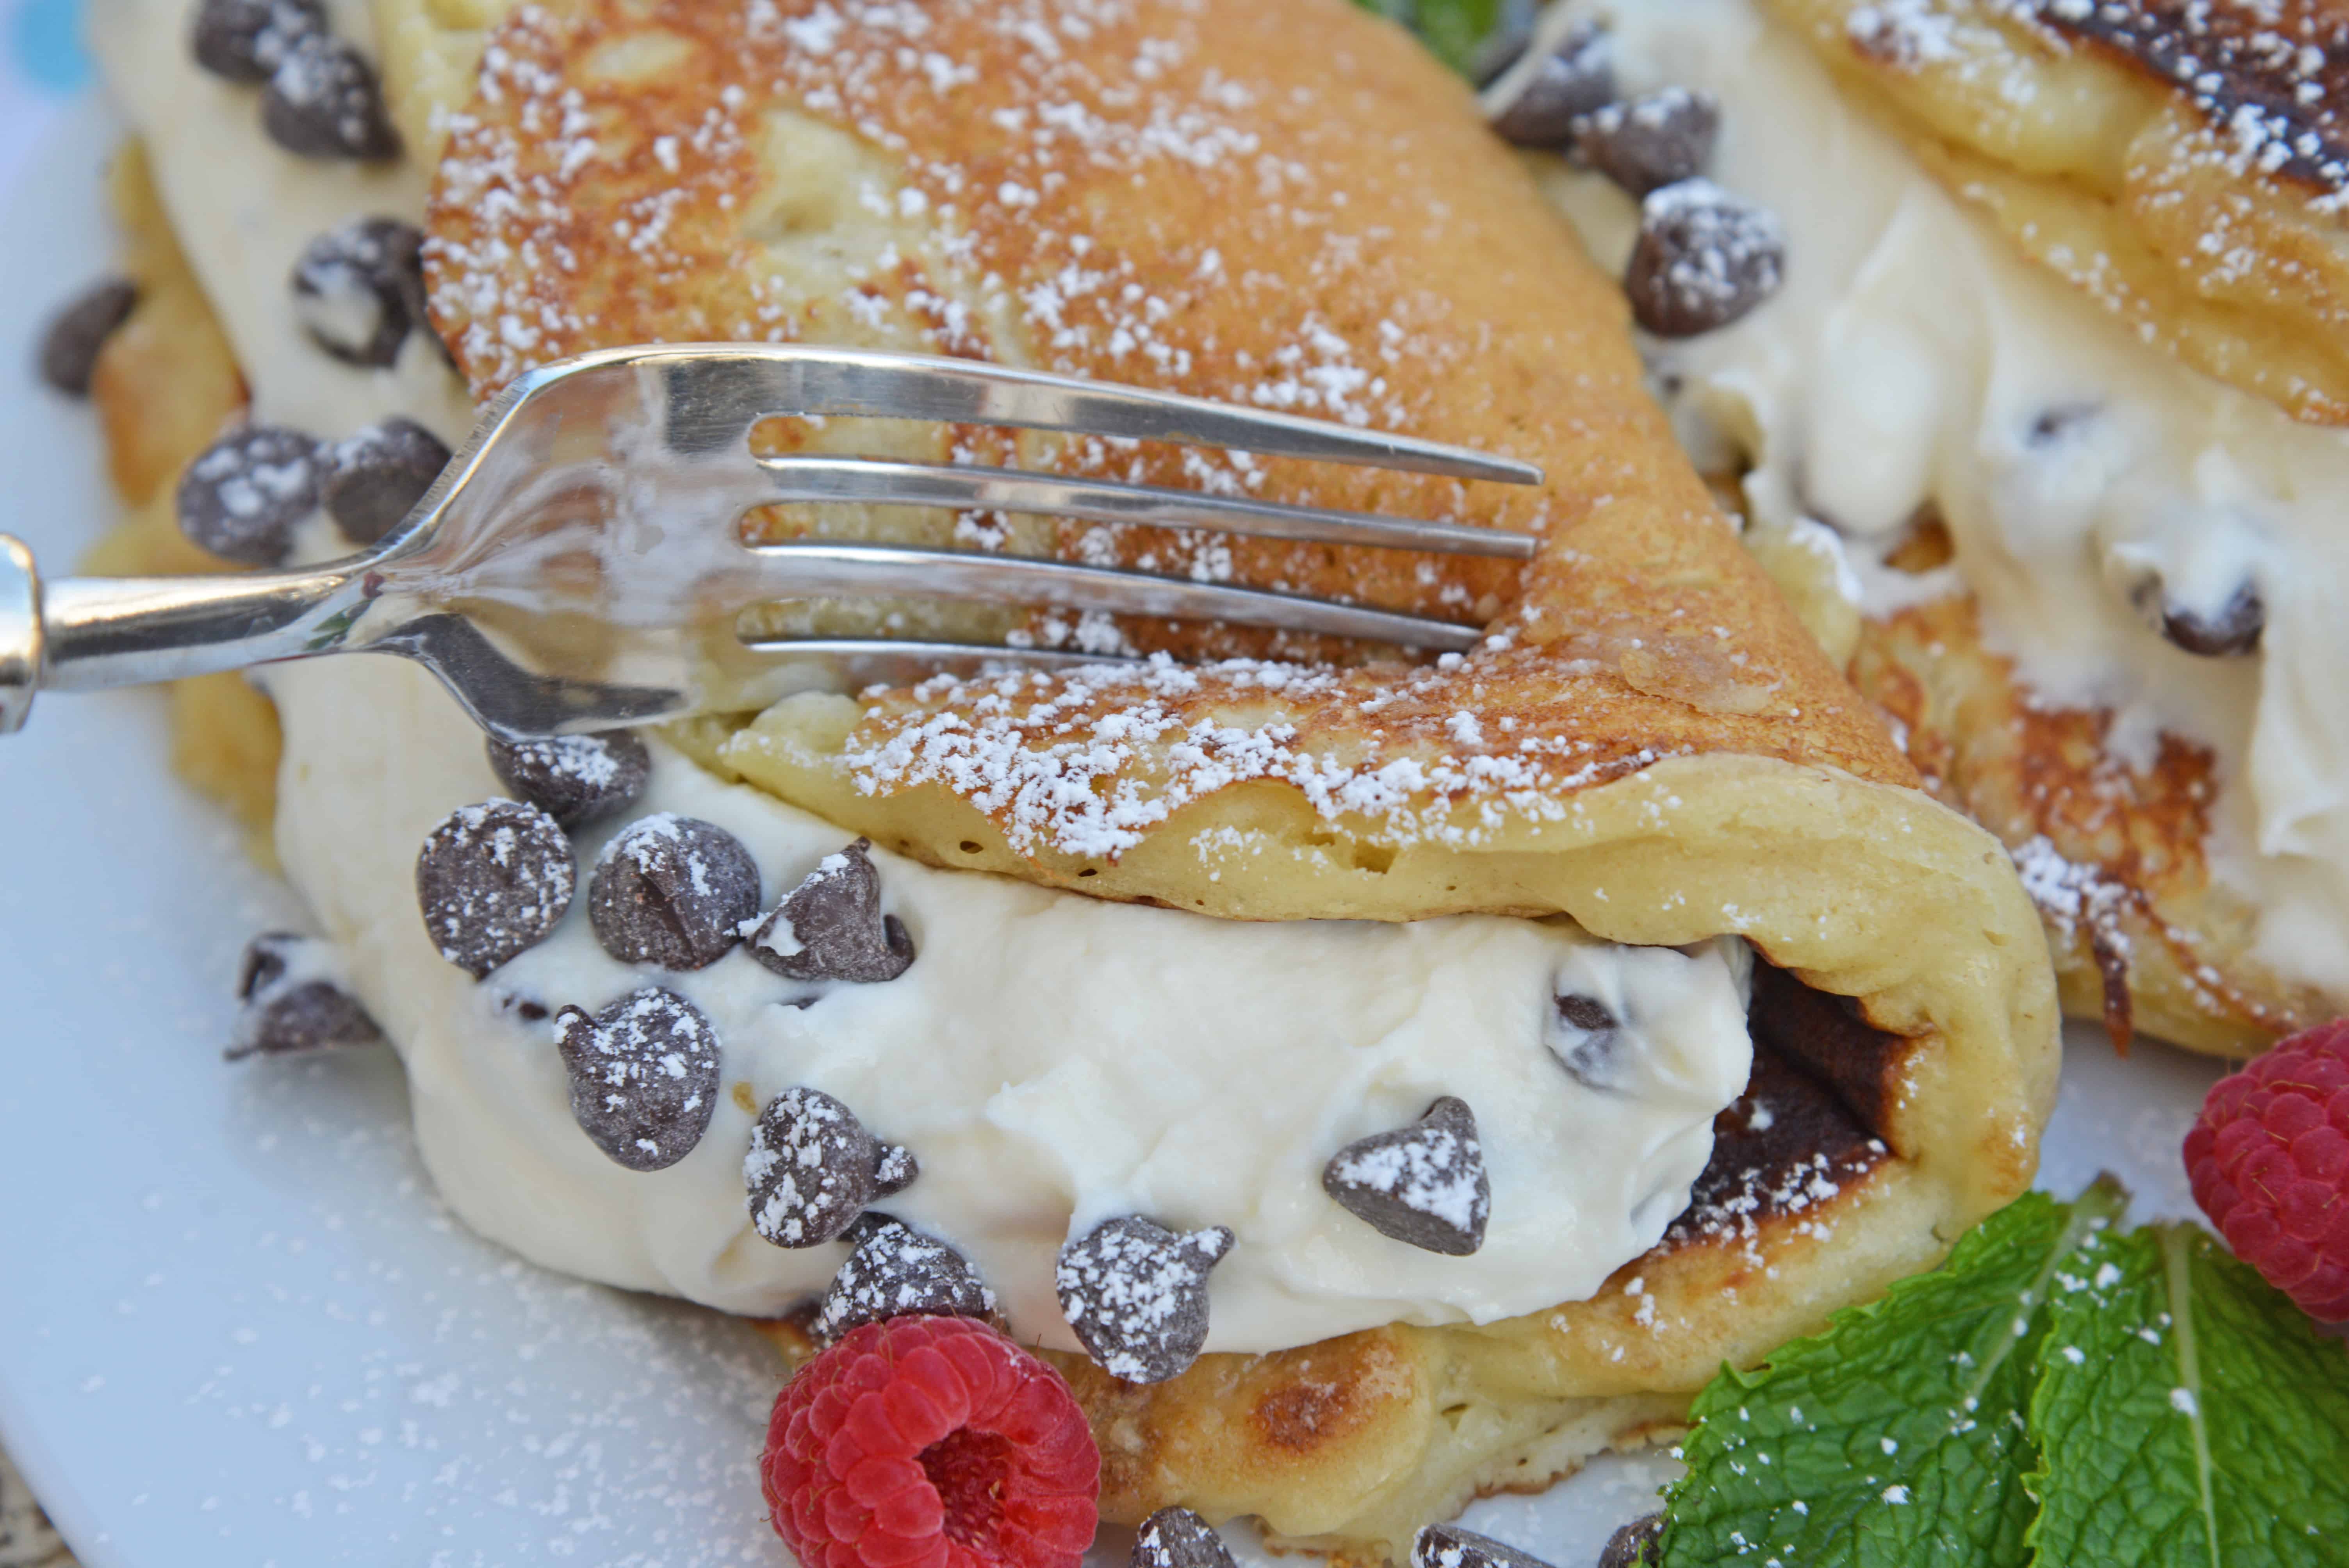 Cannoli Pancakes are stuffed with a rich, delicious cannoli filling. This breakfast cannoli is perfect for special breakfasts and brunches. #cannolipancakes #breakfastcannoli #cannolifilling www.savoryexperiments.com